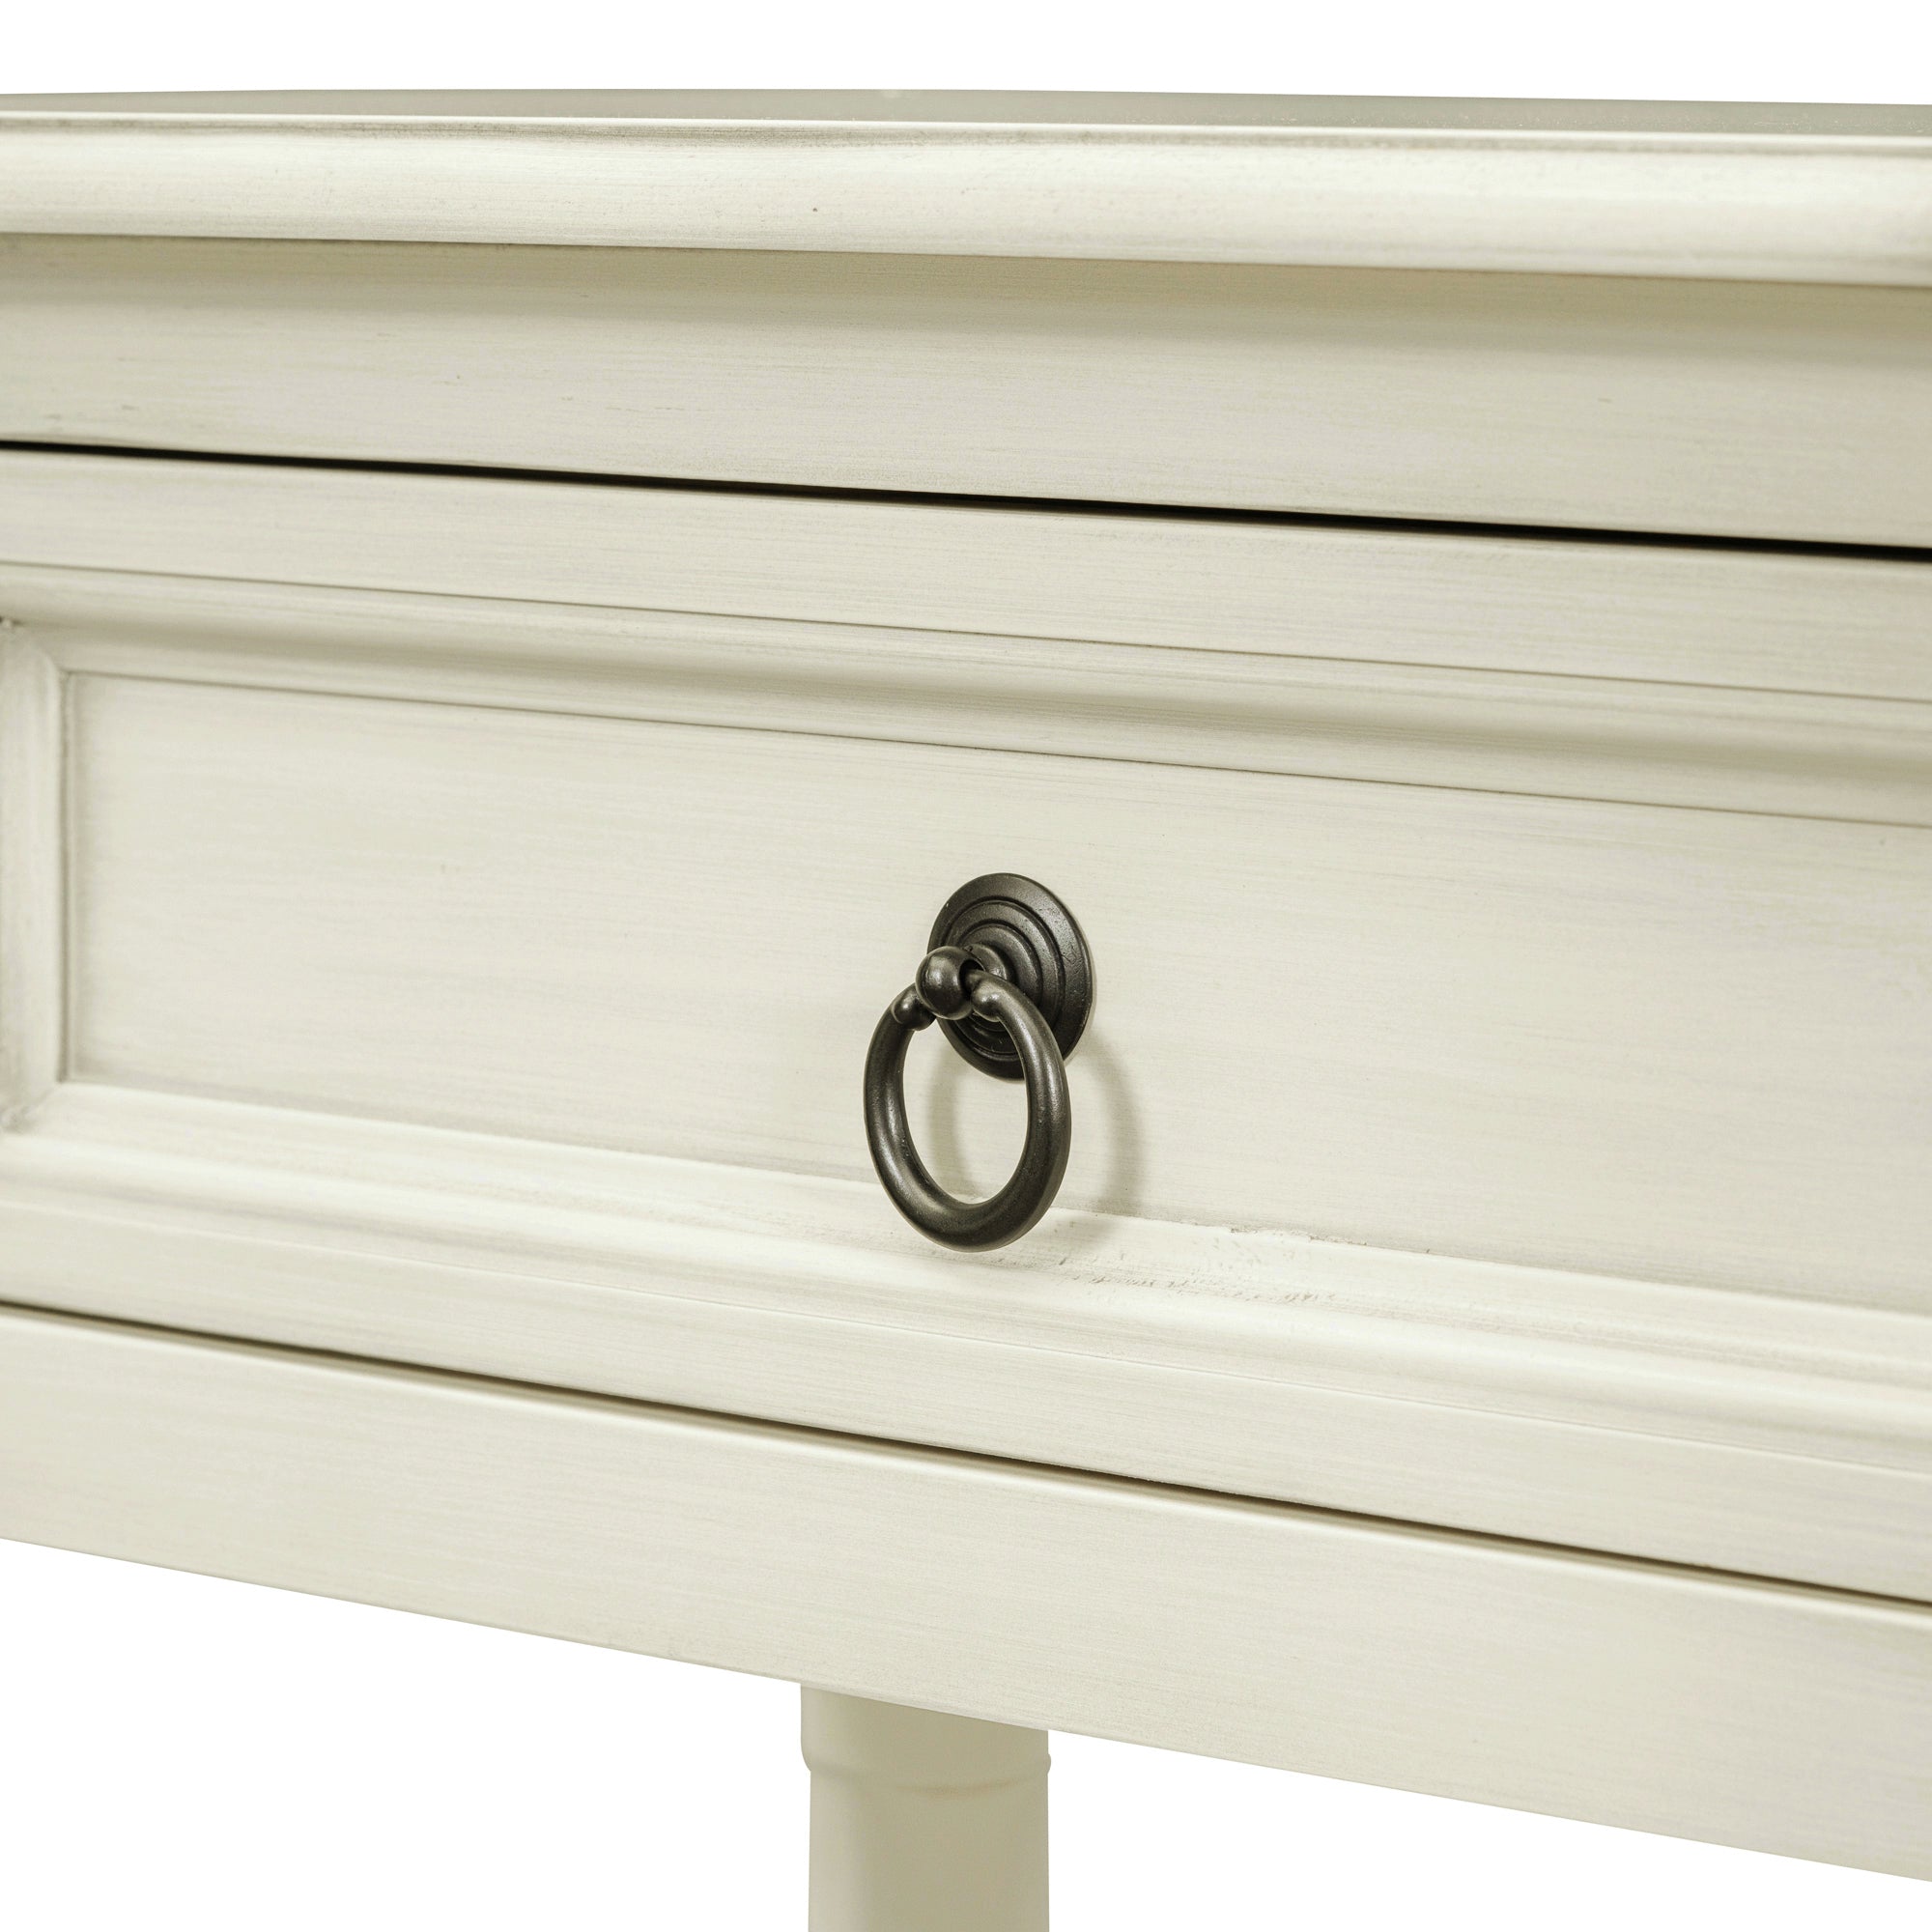 Console Table Sofa Table with Drawers for antique white-solid wood+mdf